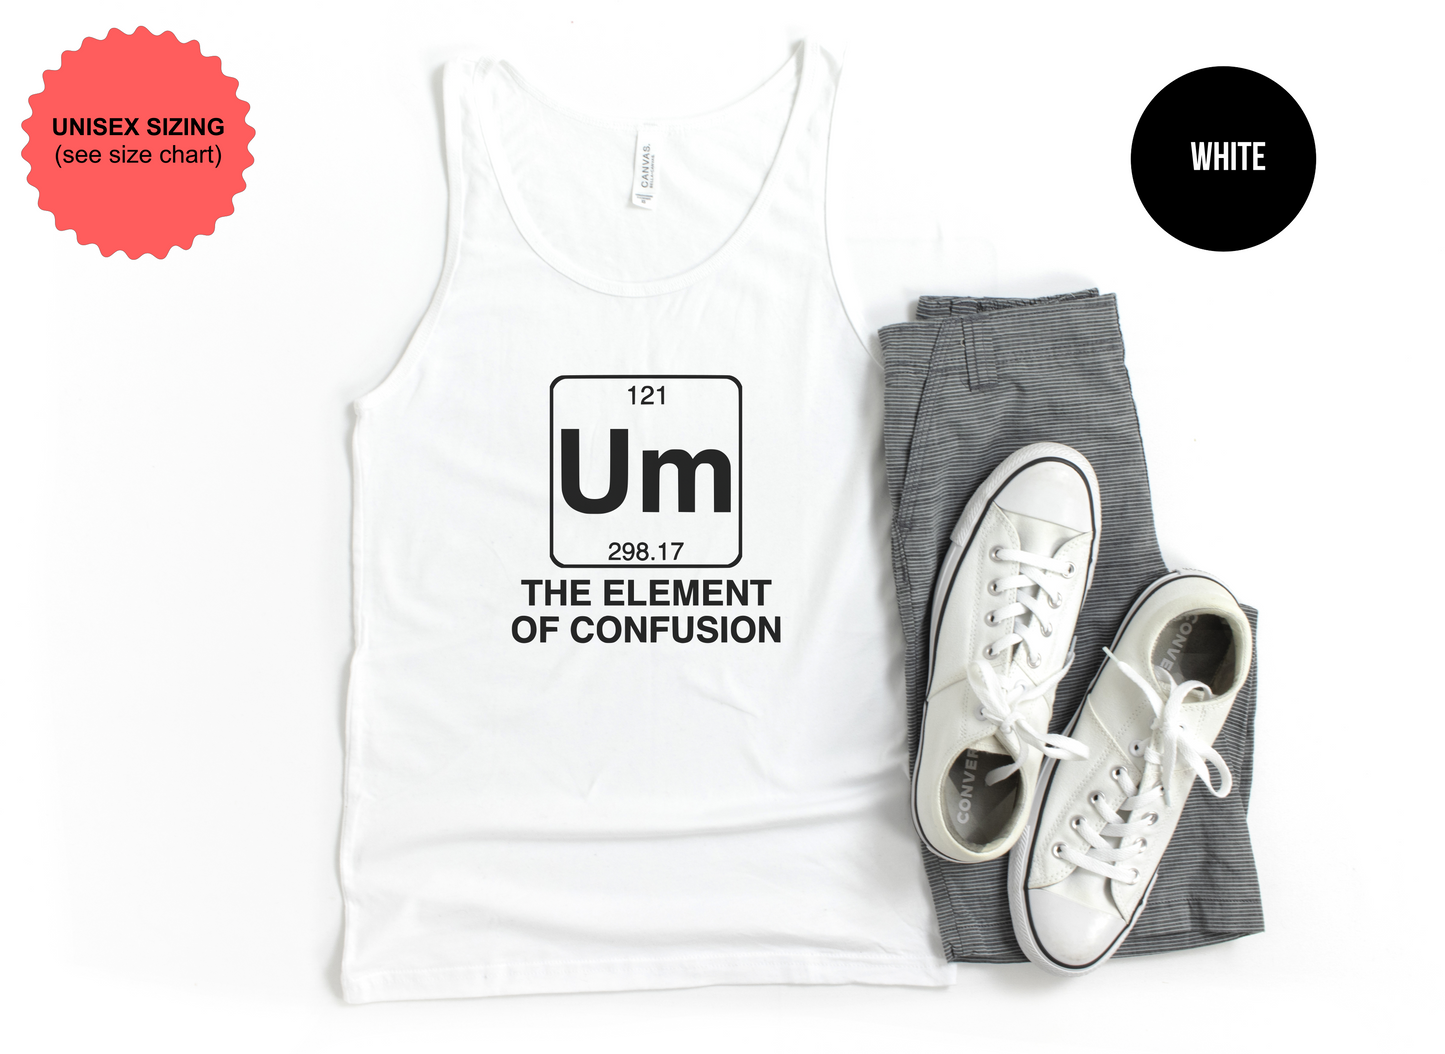 Um, The Element Of Confusion Tank Top